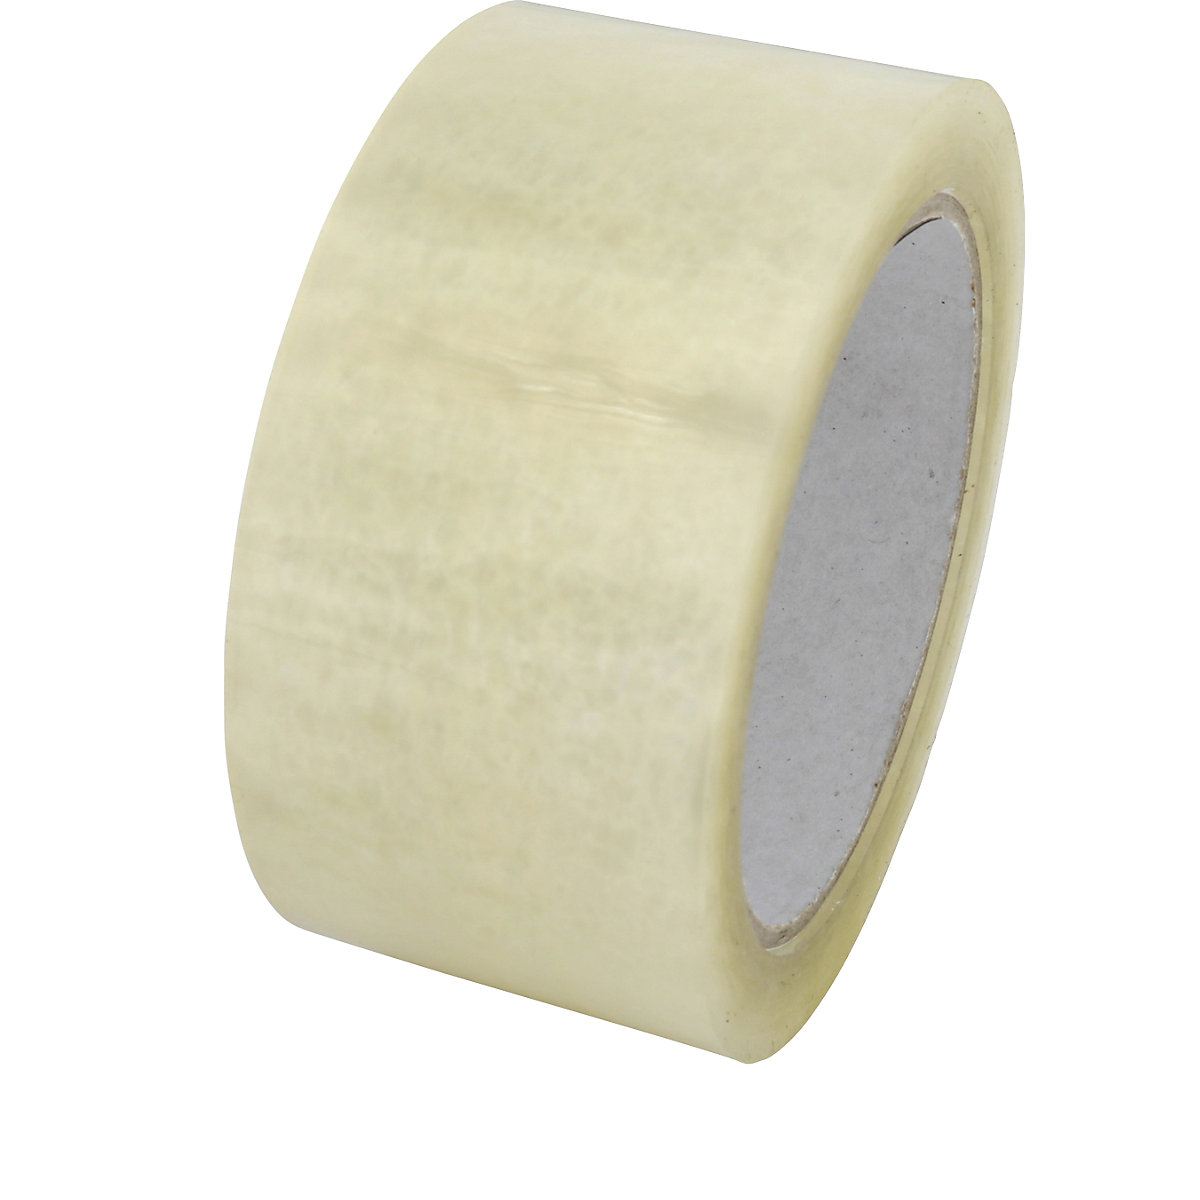 PP packing tape, quiet and extra strong model, pack of 36 rolls, transparent, tape width 50 mm-2